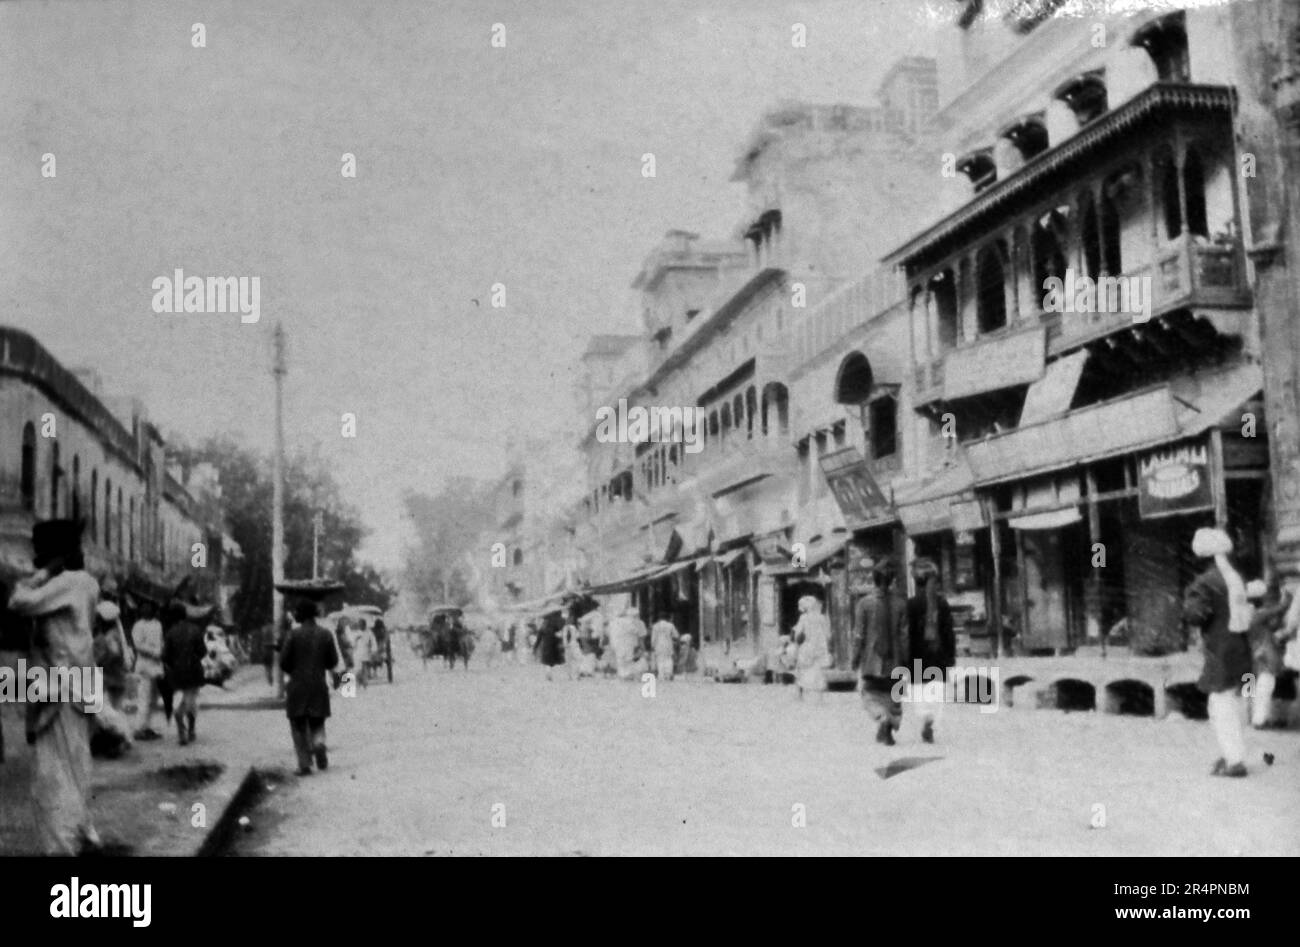 Southern India, parts of which are now known as Pakistan: Anashali Bazaar, Lahore, c1918. From a series taken from the original first World War snapshot photo taken in India, c1917-19. The originals were small photographs which might look poor if enlarged too much. Stock Photo